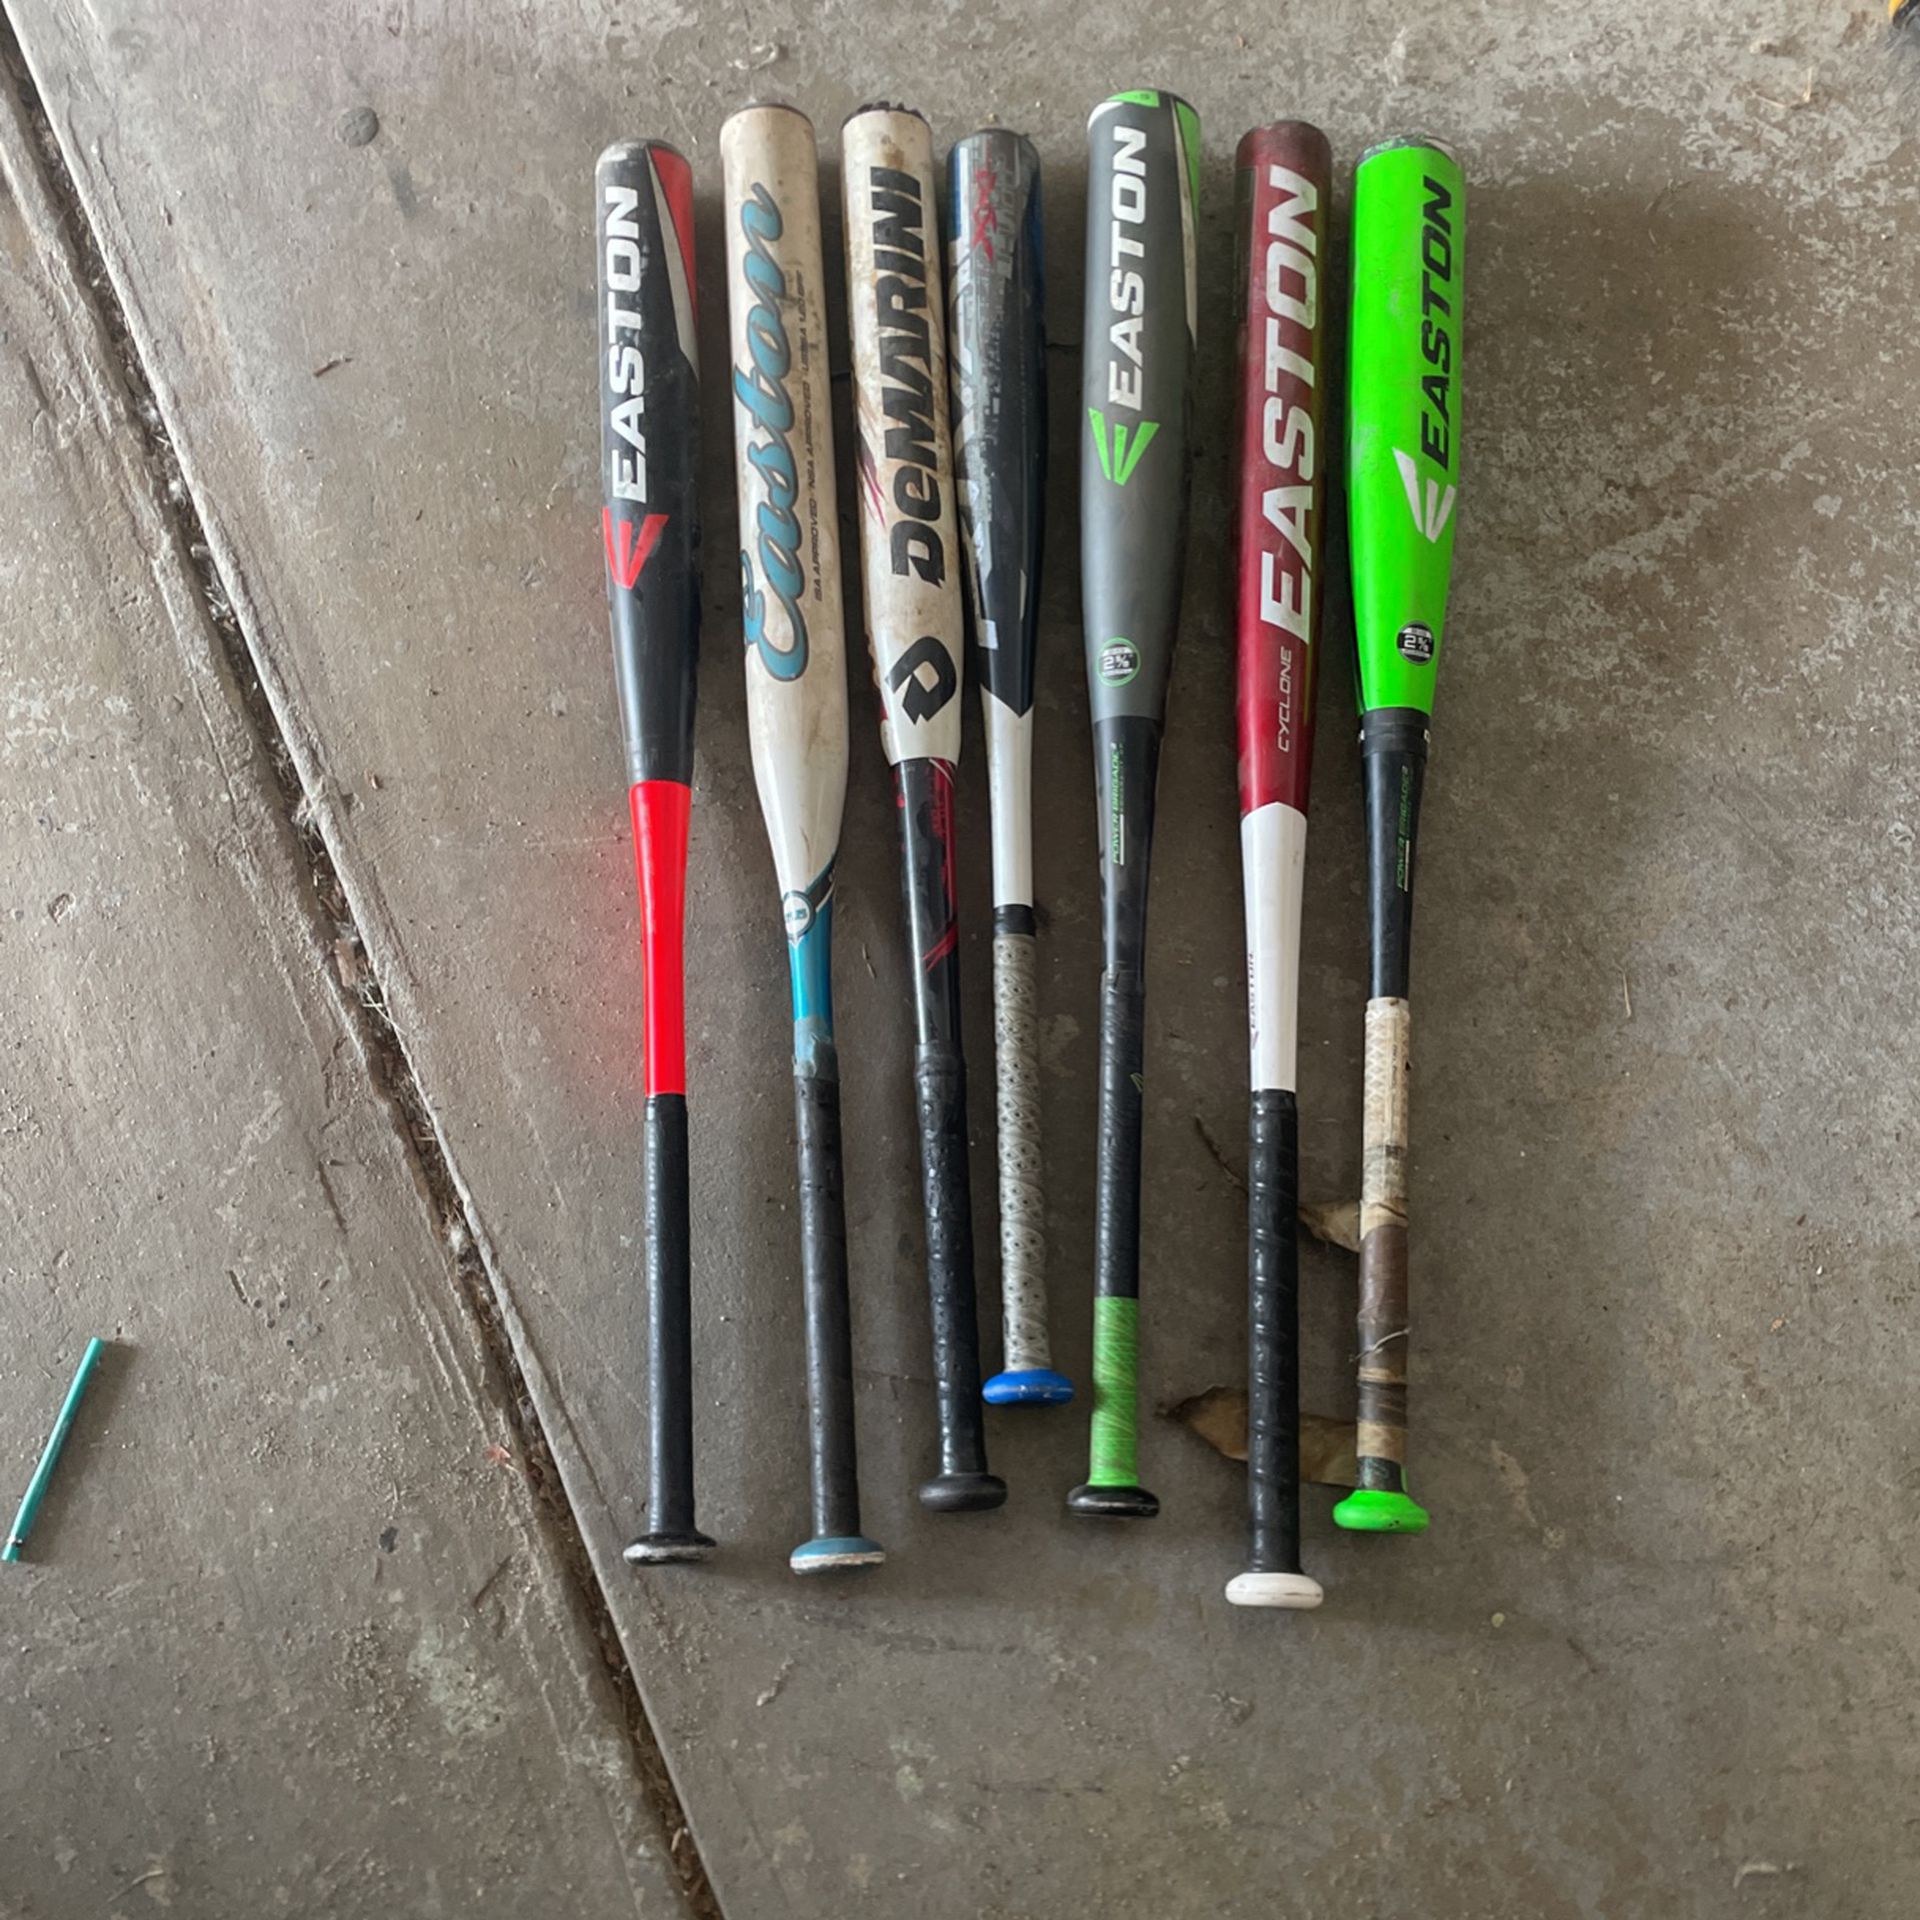 Used Baseball Soft ball lot for Sale in Modesto, CA - OfferUp